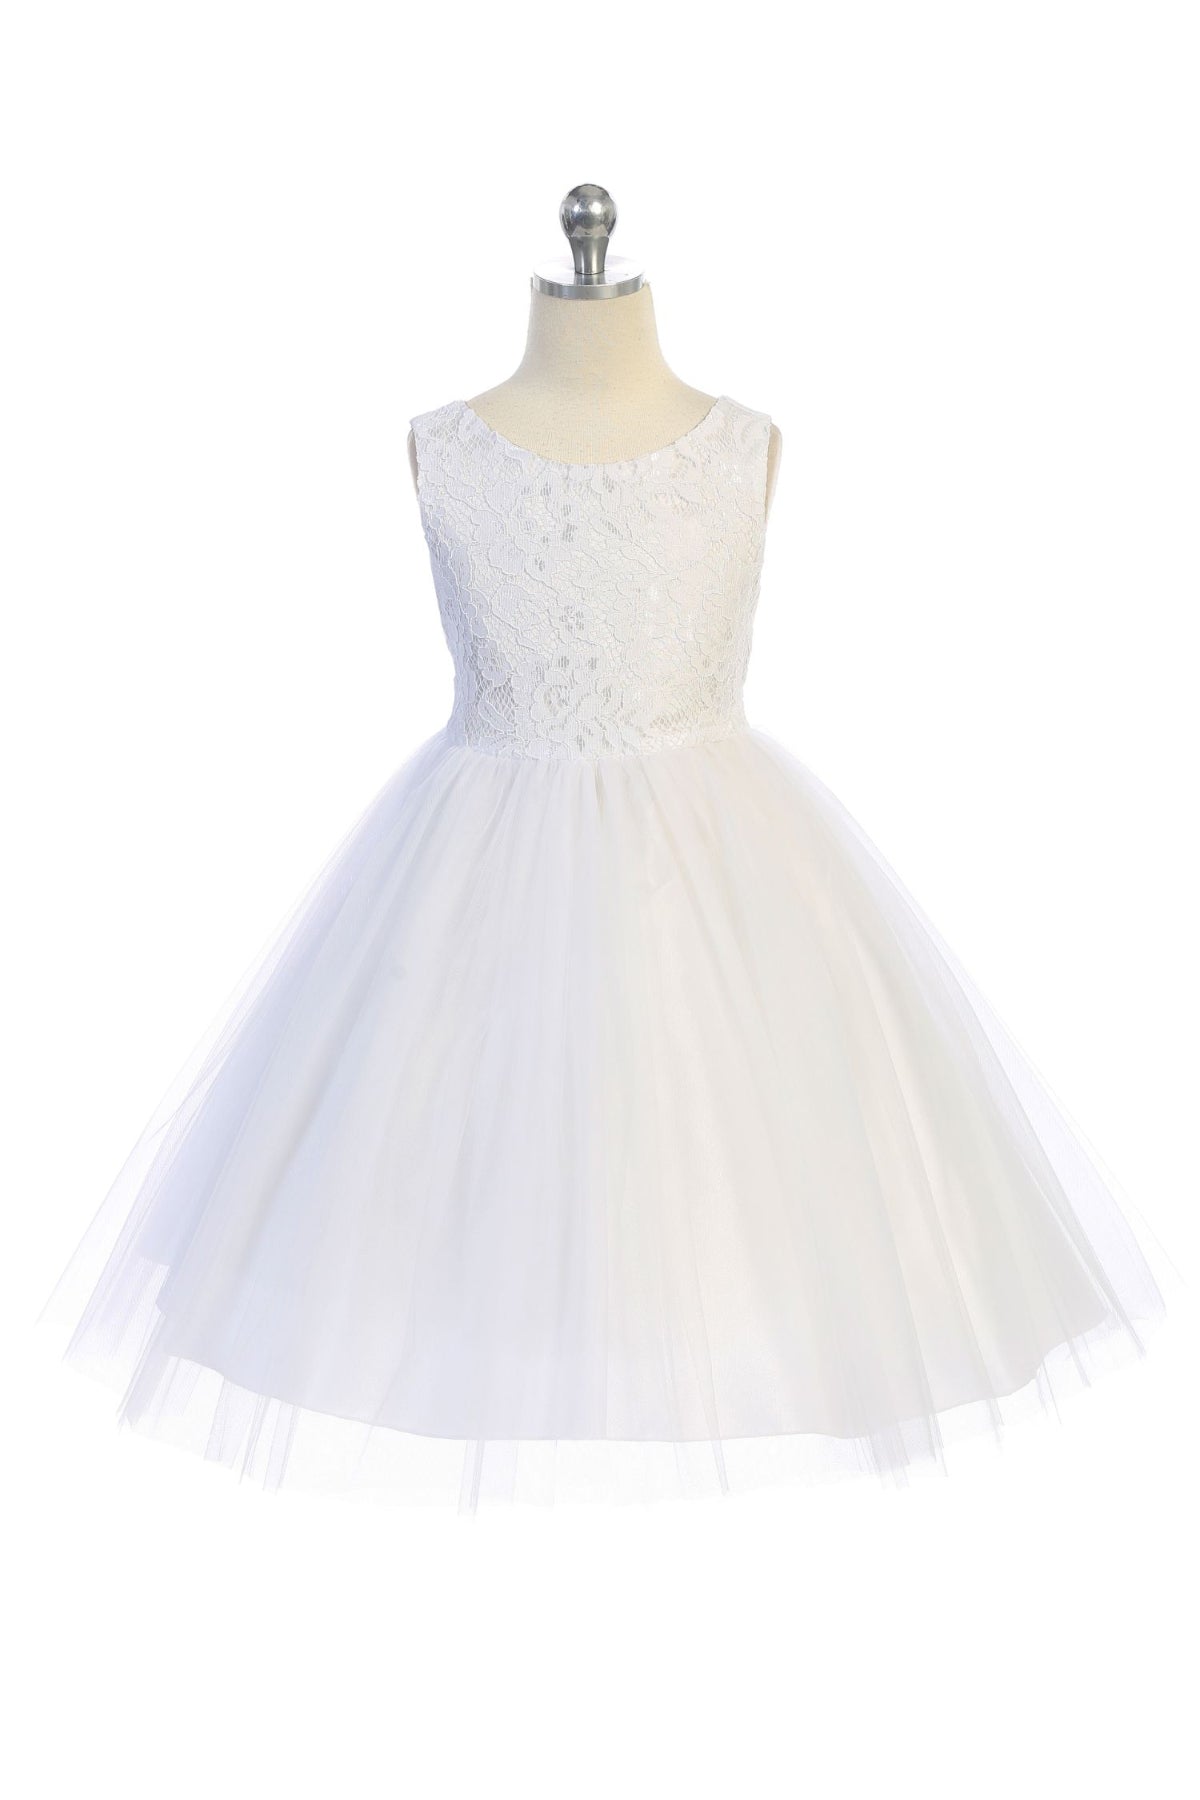 456-B Lace Illusion Girls Dress with Mesh Pearl Trim